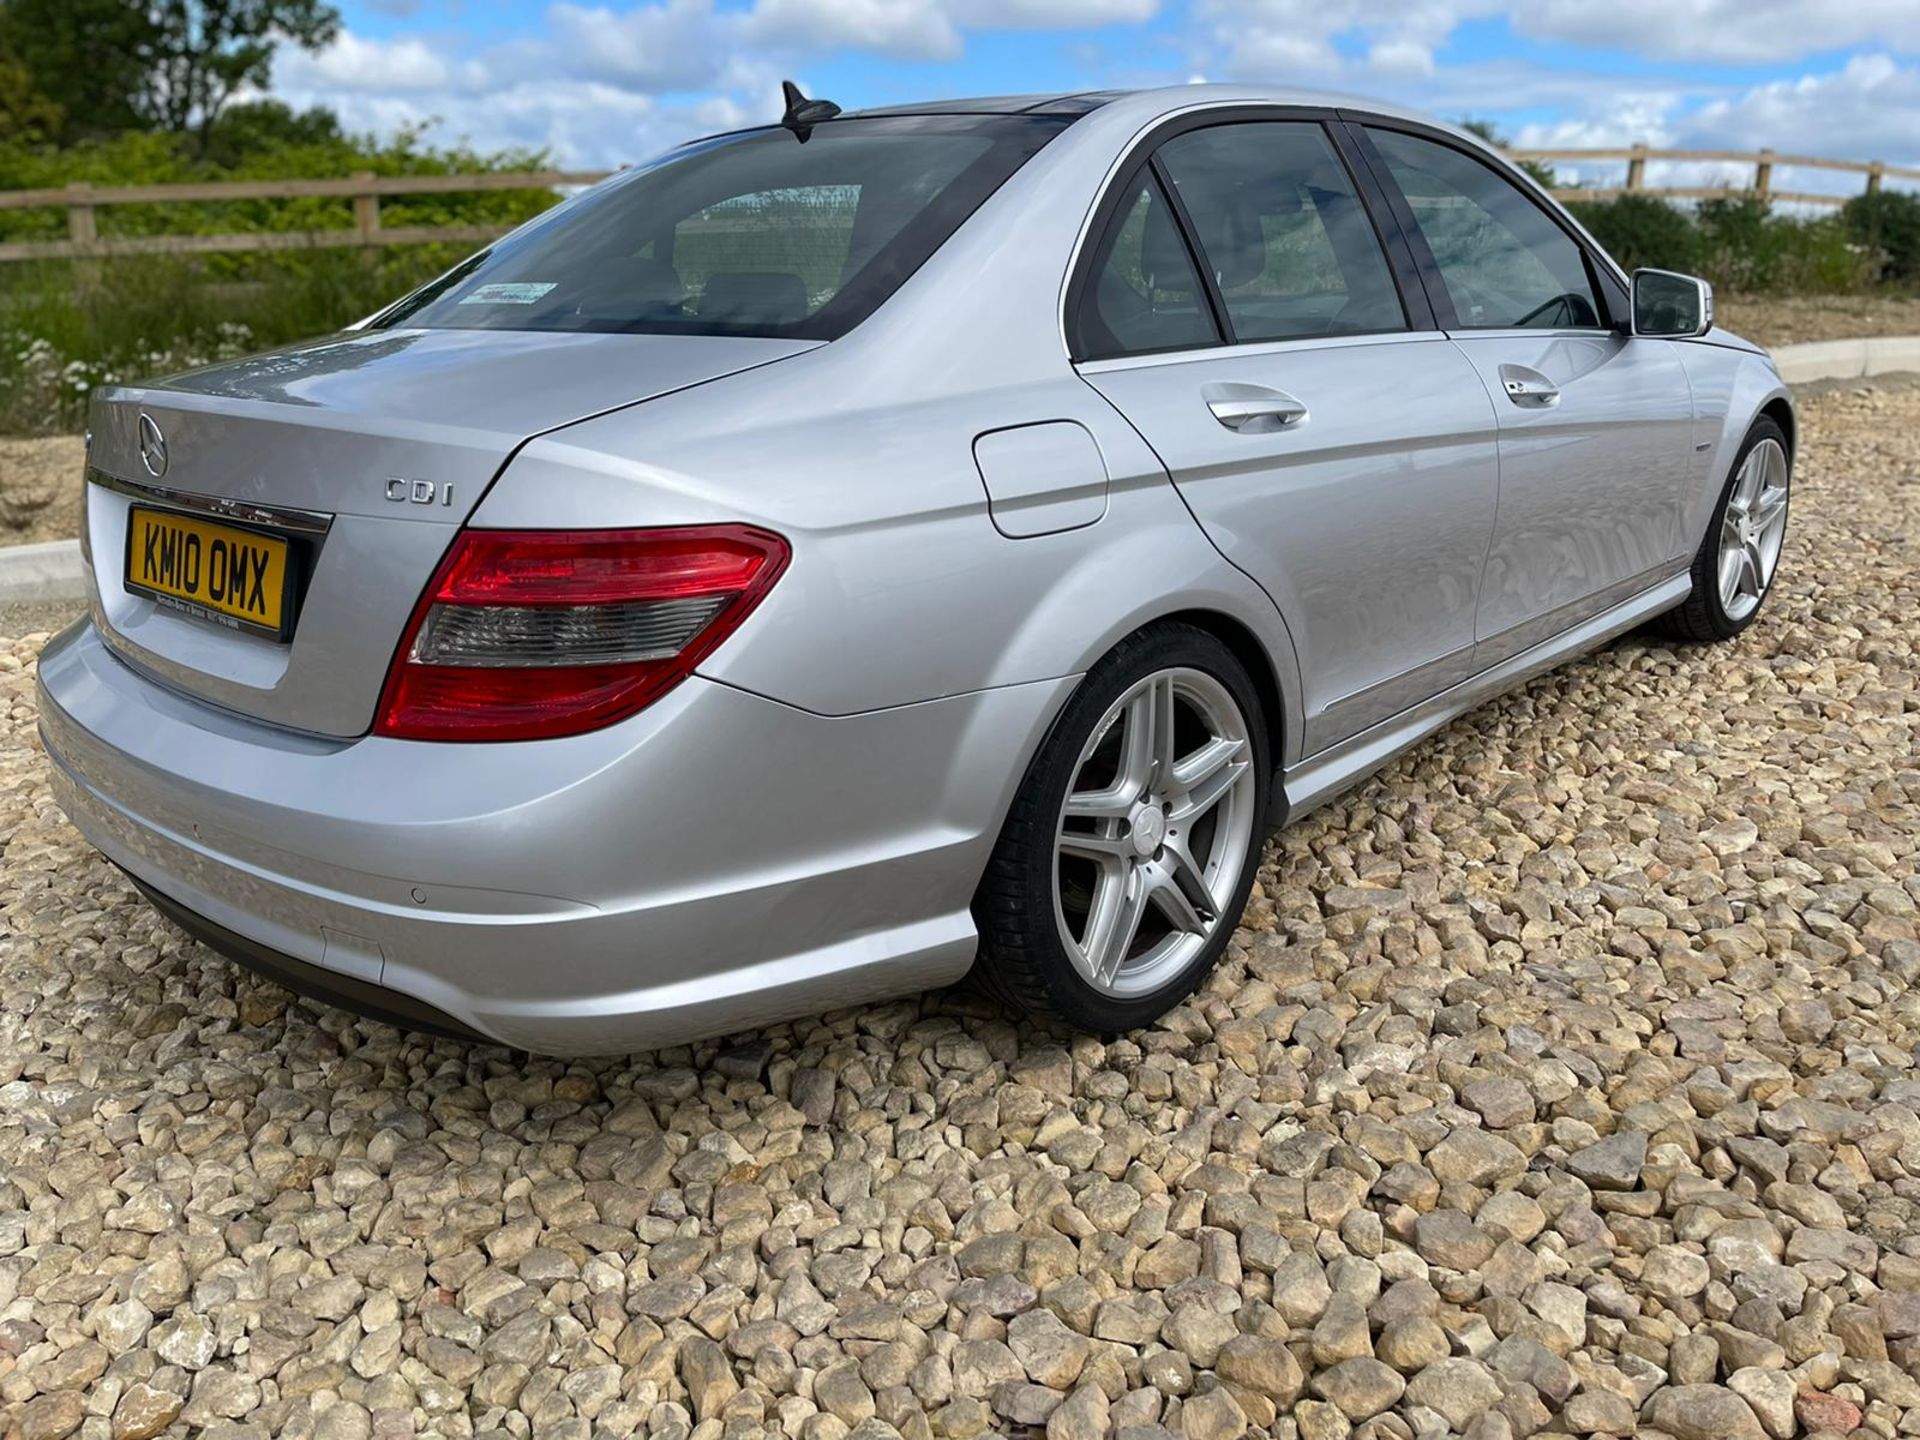 2010 MERCEDES-BENZ C220 BLUEF-CY SPORT CDI A, PANORAMIC ROOF AND PHONE CONNECTIVITY *NO VAT* - Image 4 of 11